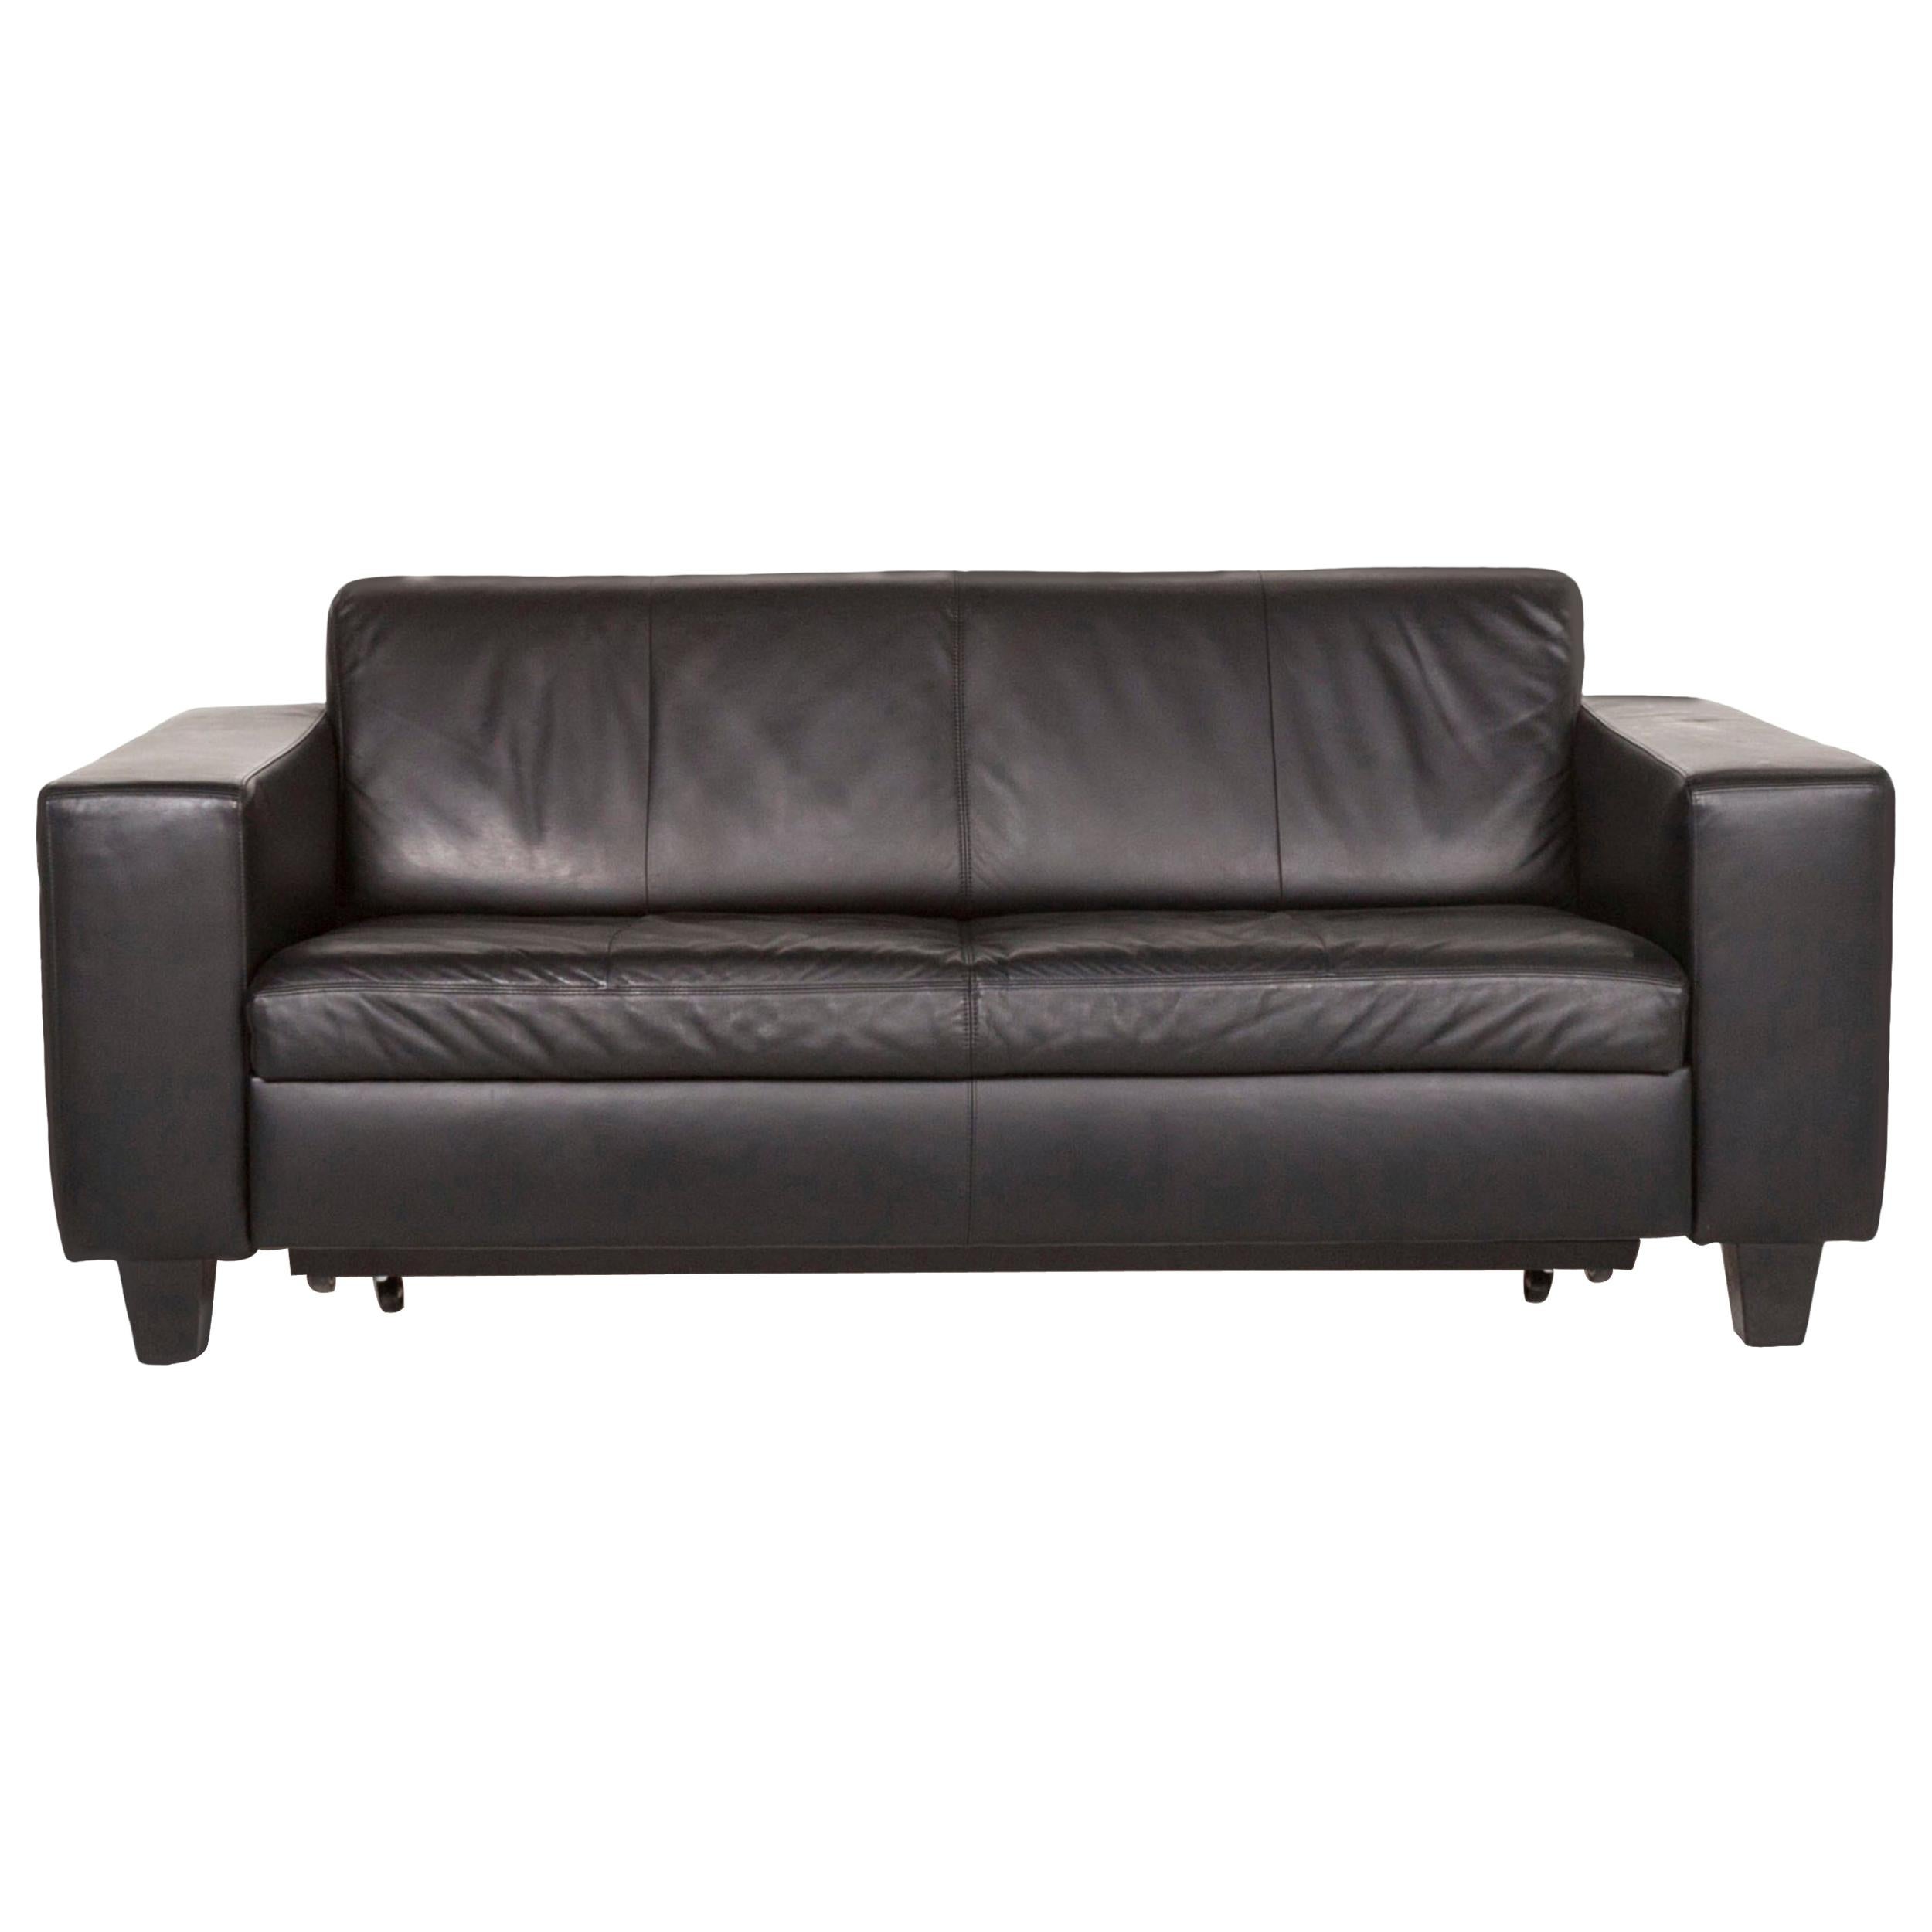 Machalke Leather Sofa Bed Black Two-Seat Sofa Sleep Function Couch